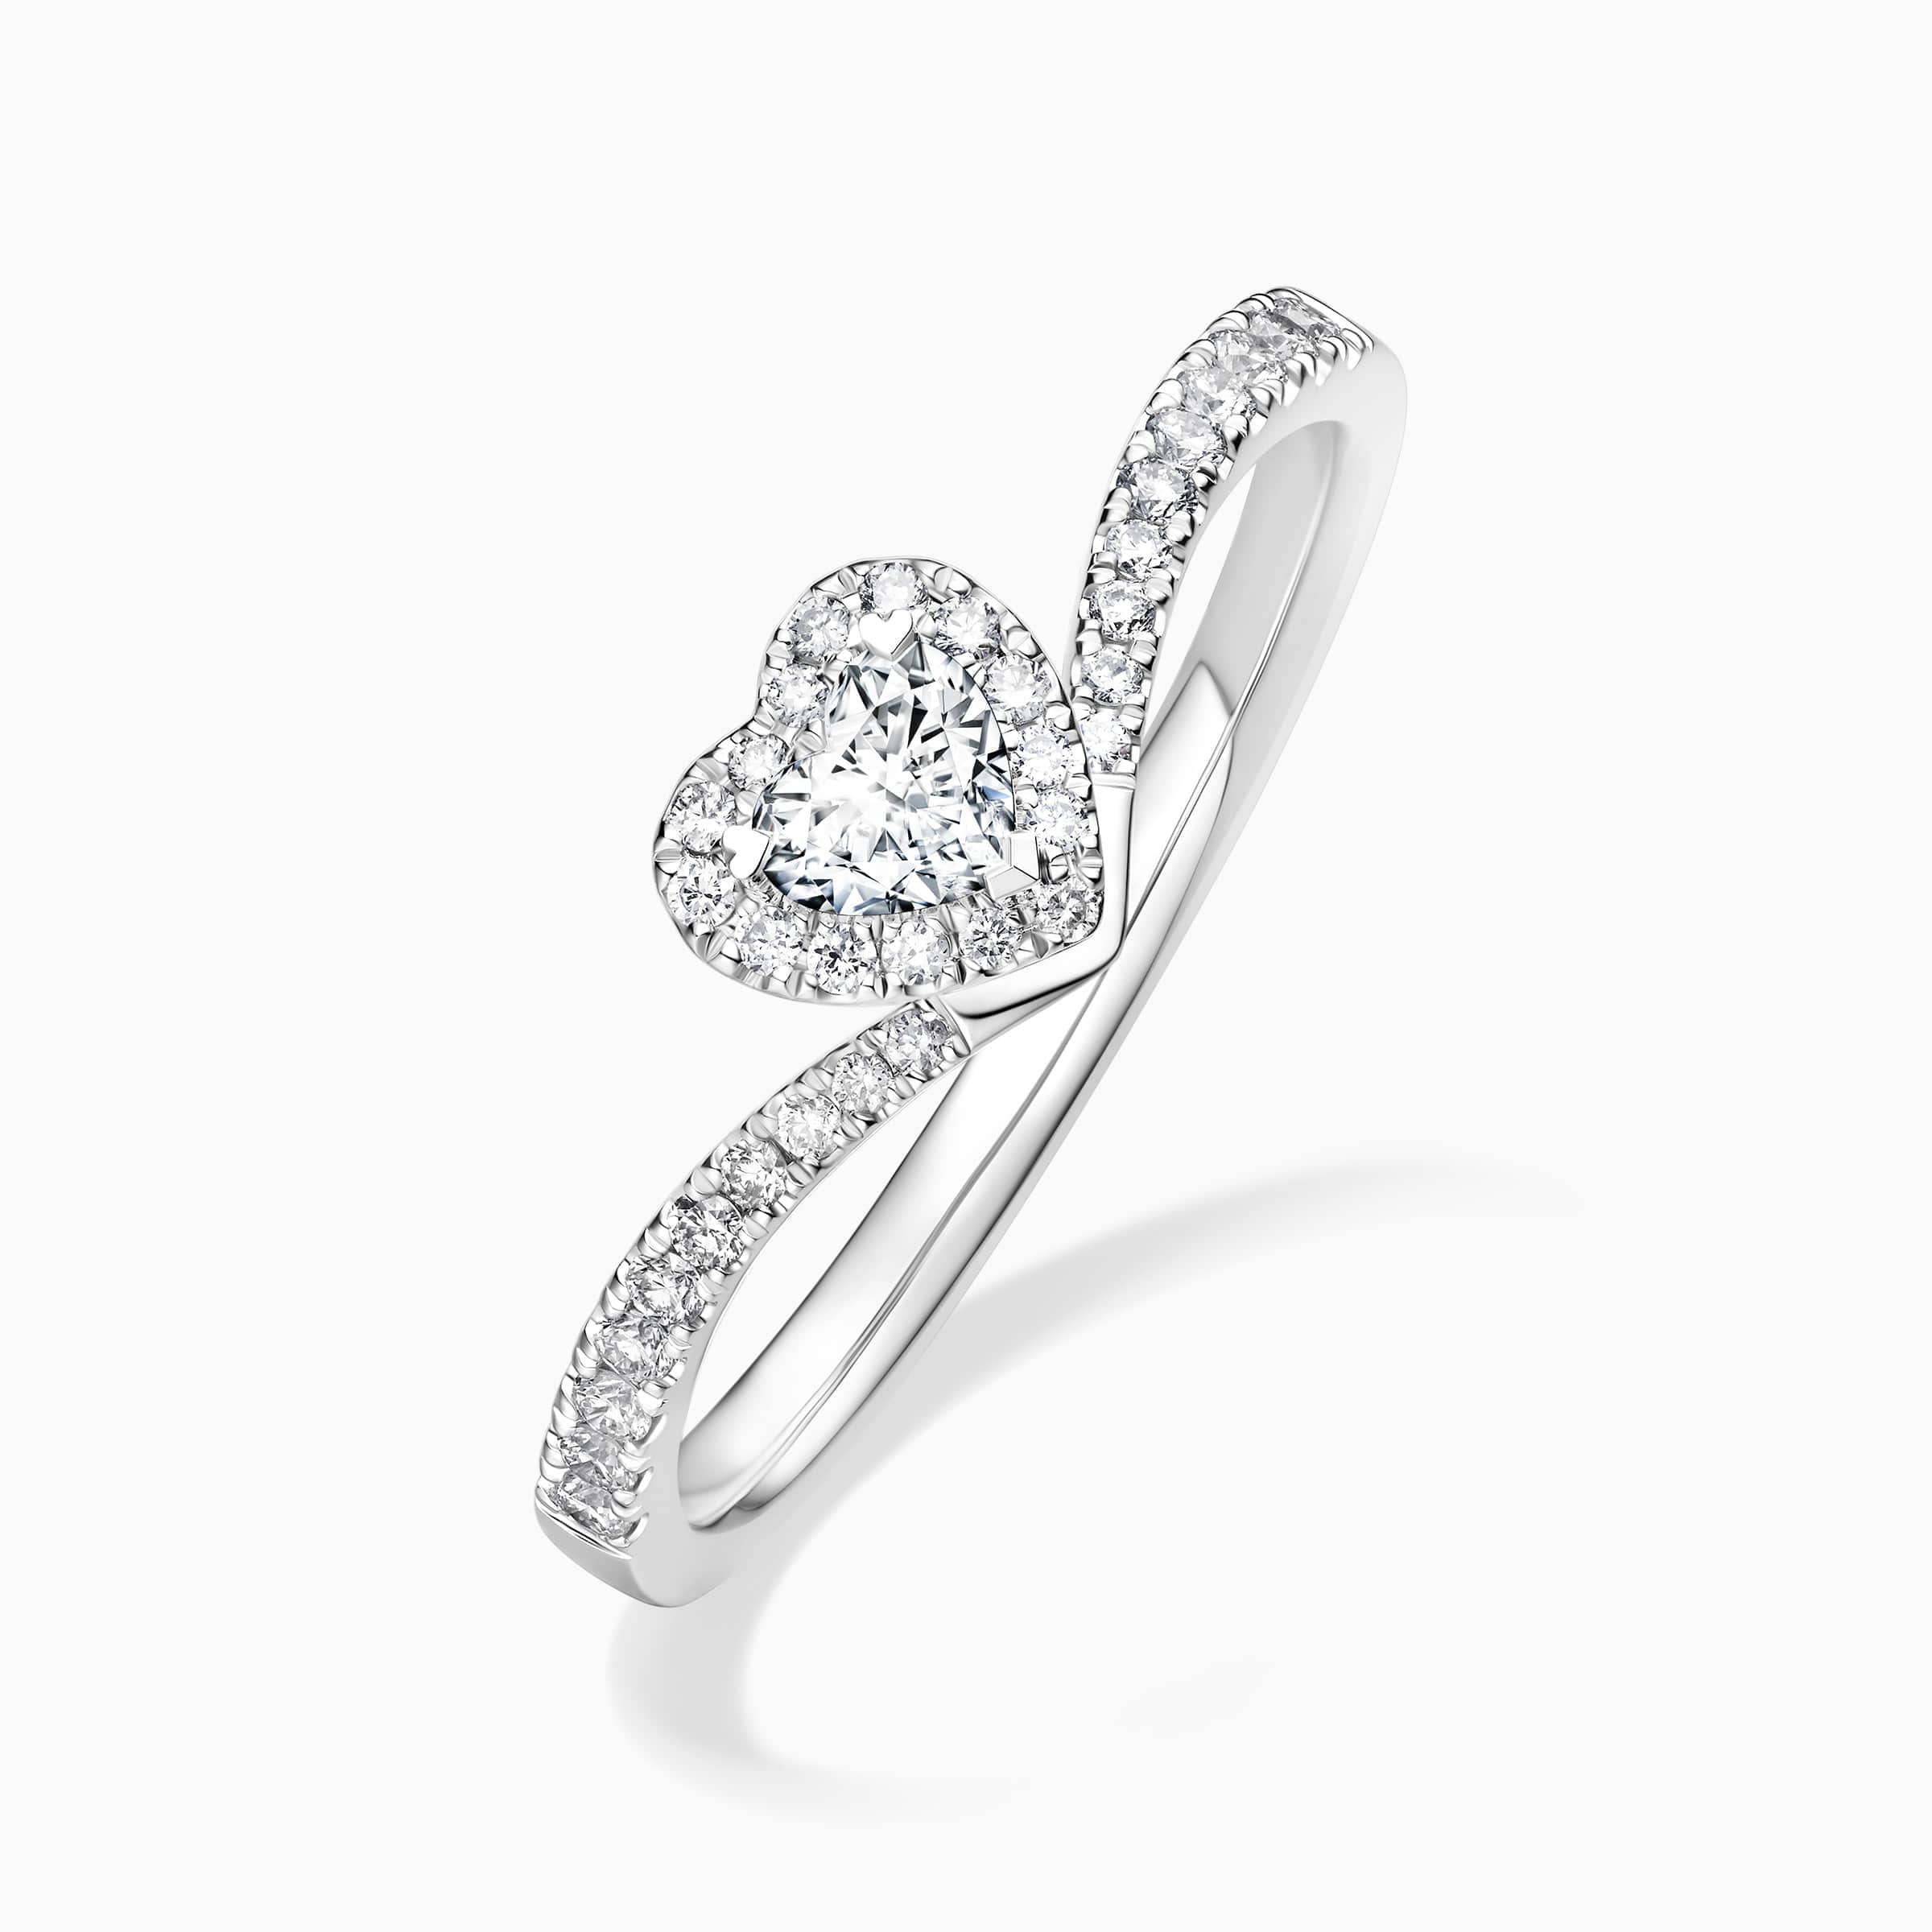 darry ring halo heart engagement ring angle view